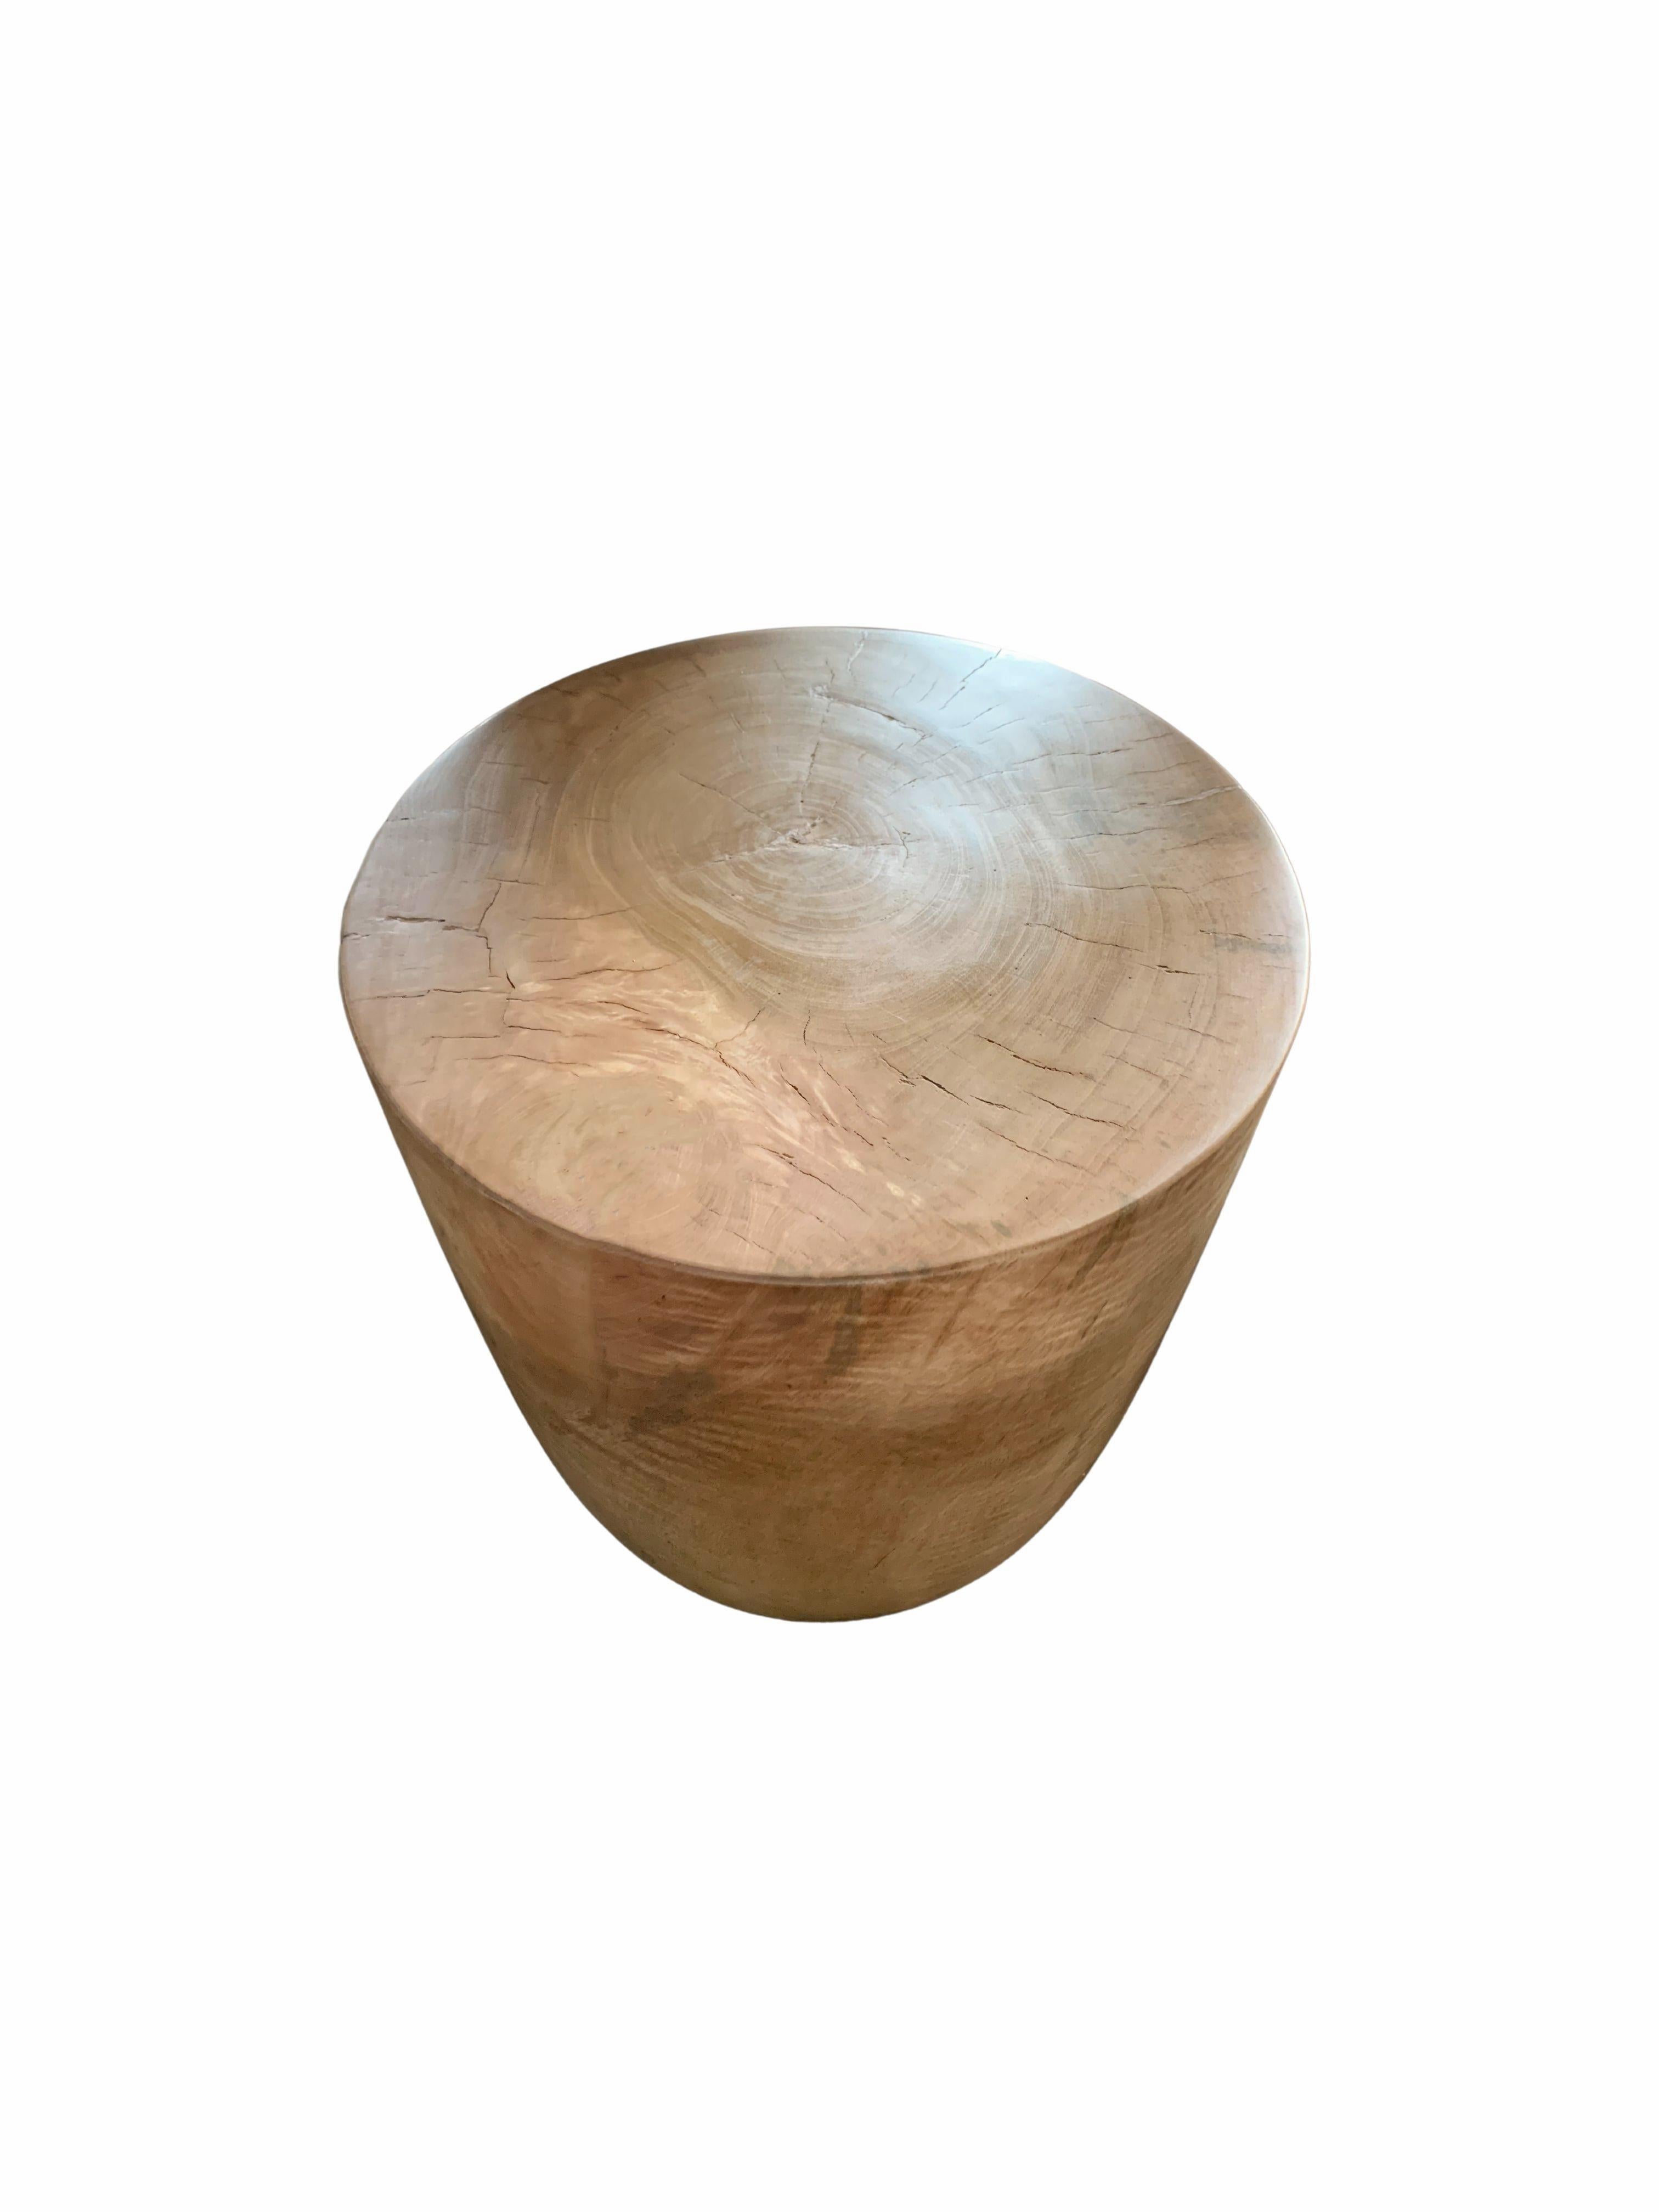 A wonderfully sculptural round side table. Its neutral pigment and subtle wood texture makes it perfect for any space. A uniquely sculptural and versatile piece certain to invoke conversation. This table was crafted from solid mango wood and has a